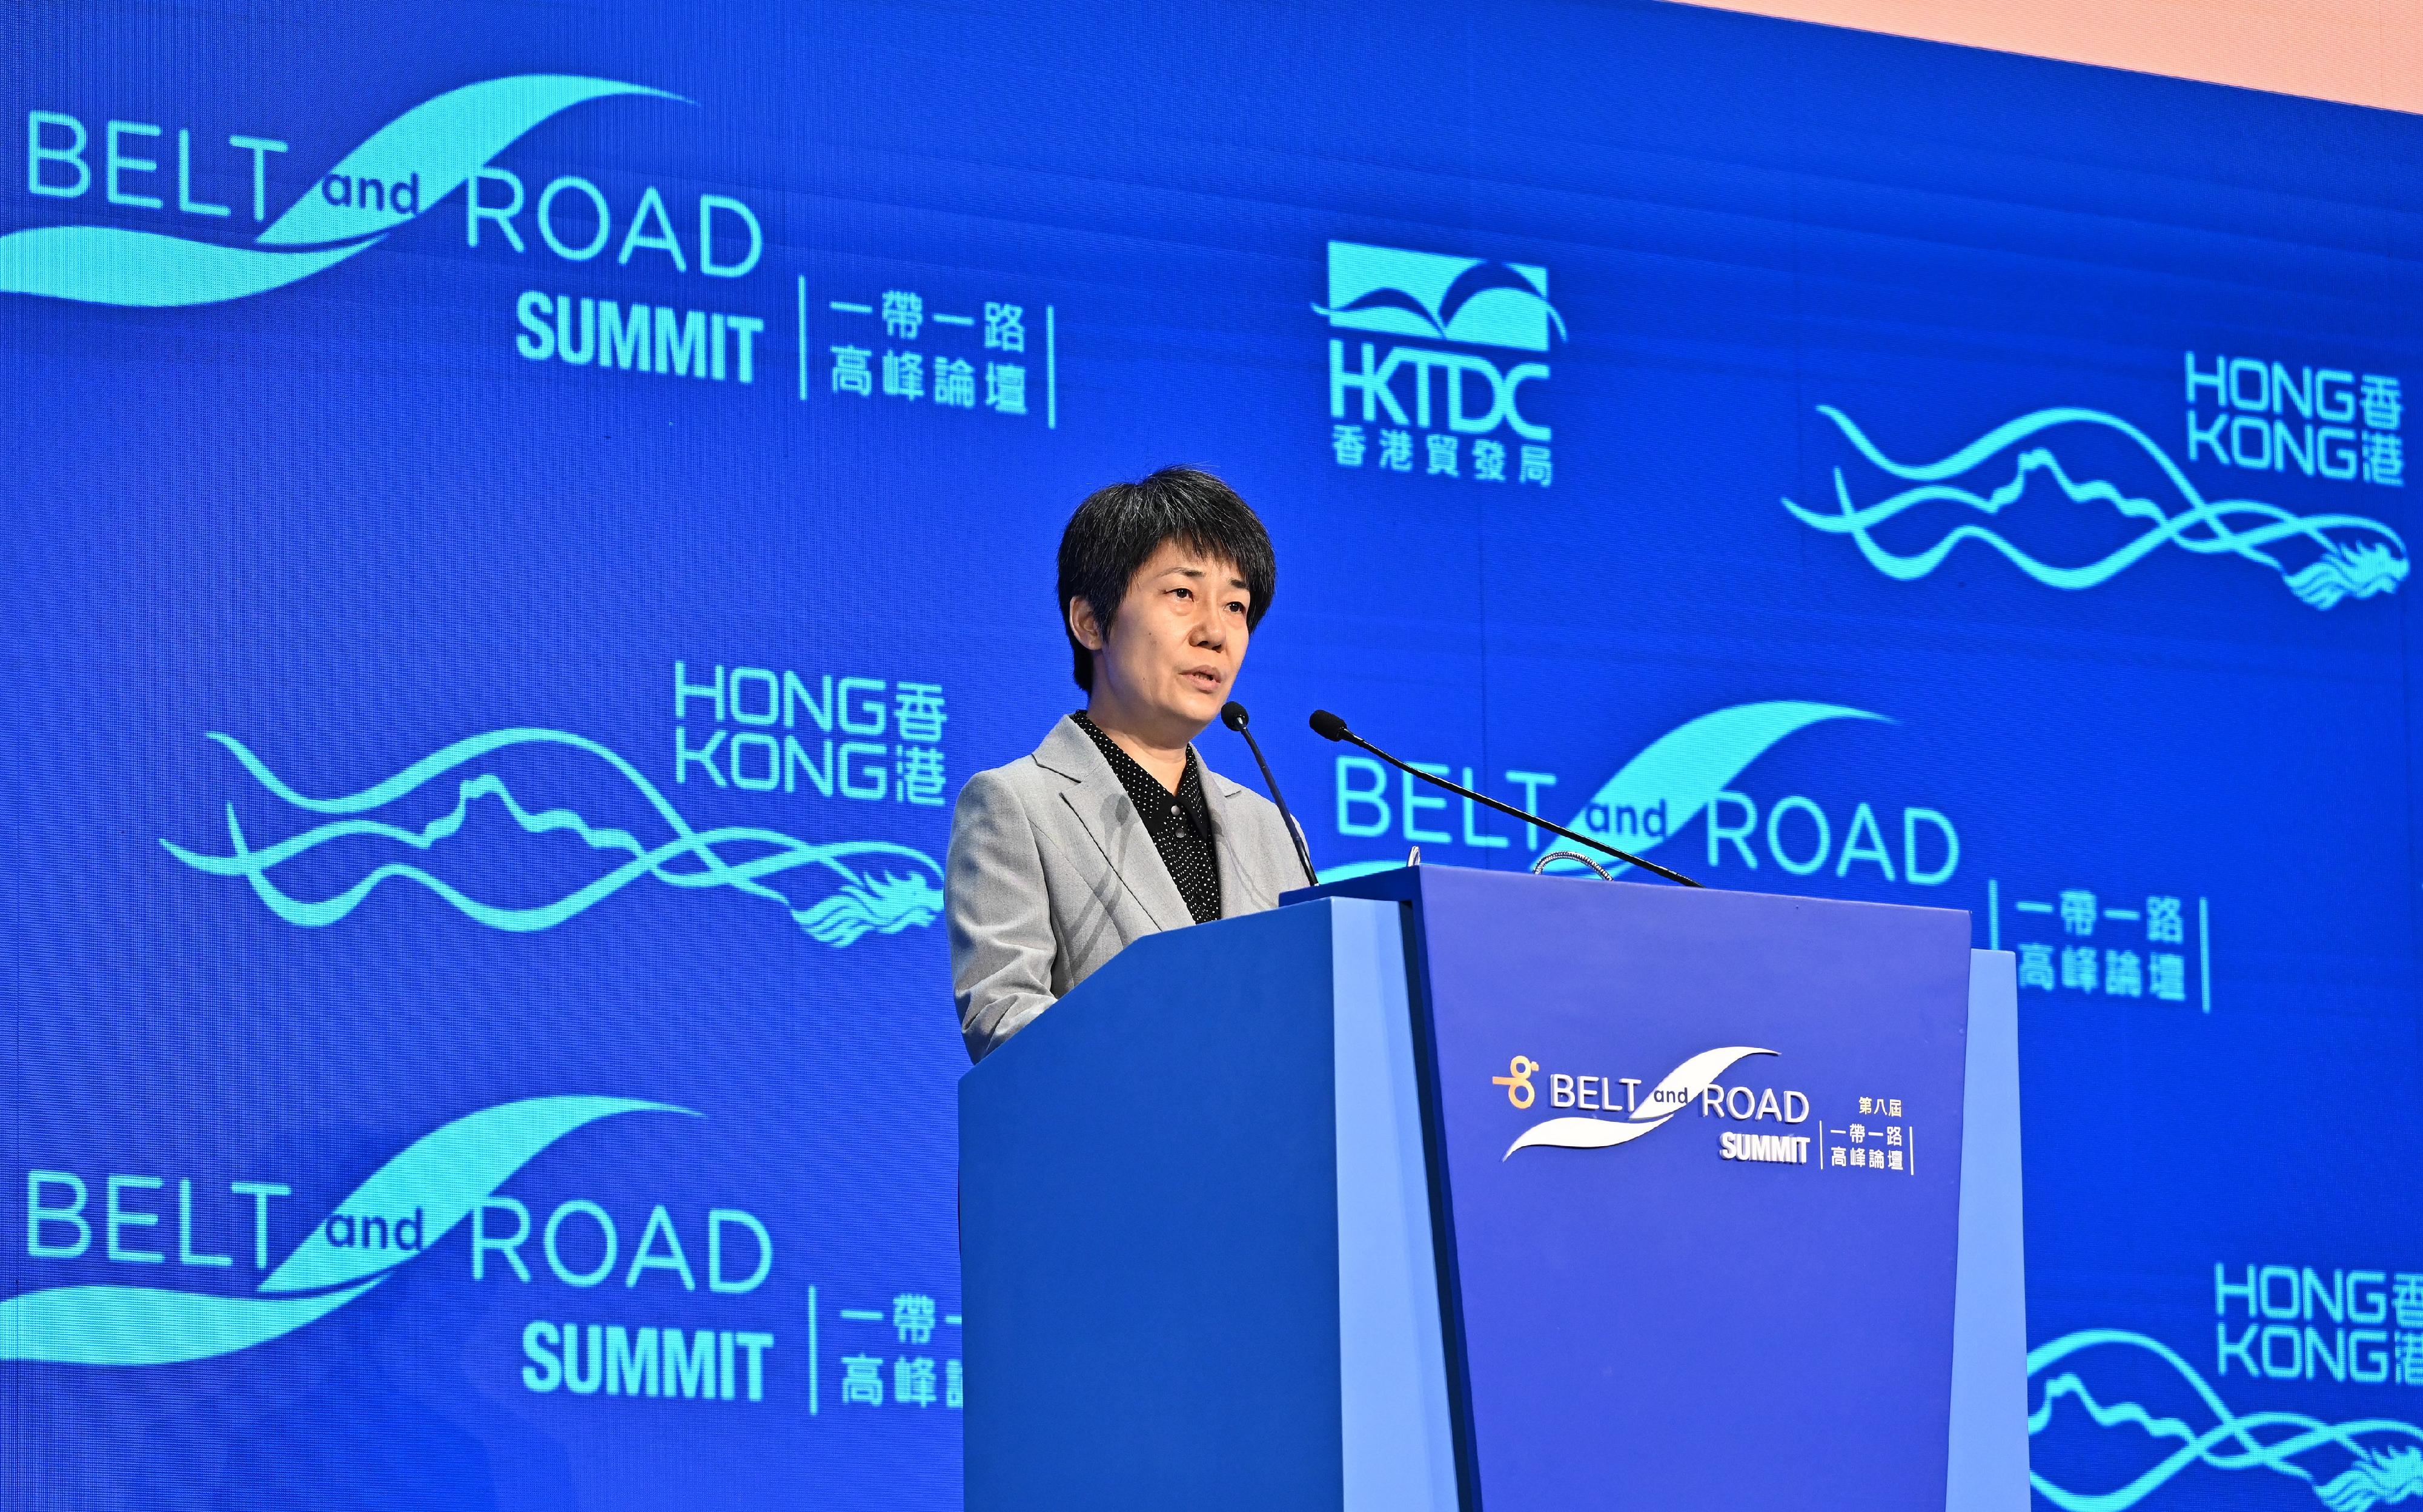 The eighth Belt and Road Summit opened today (September 13). Vice Minister of Commerce Ms Guo Tingting spoke at the opening session this morning.
